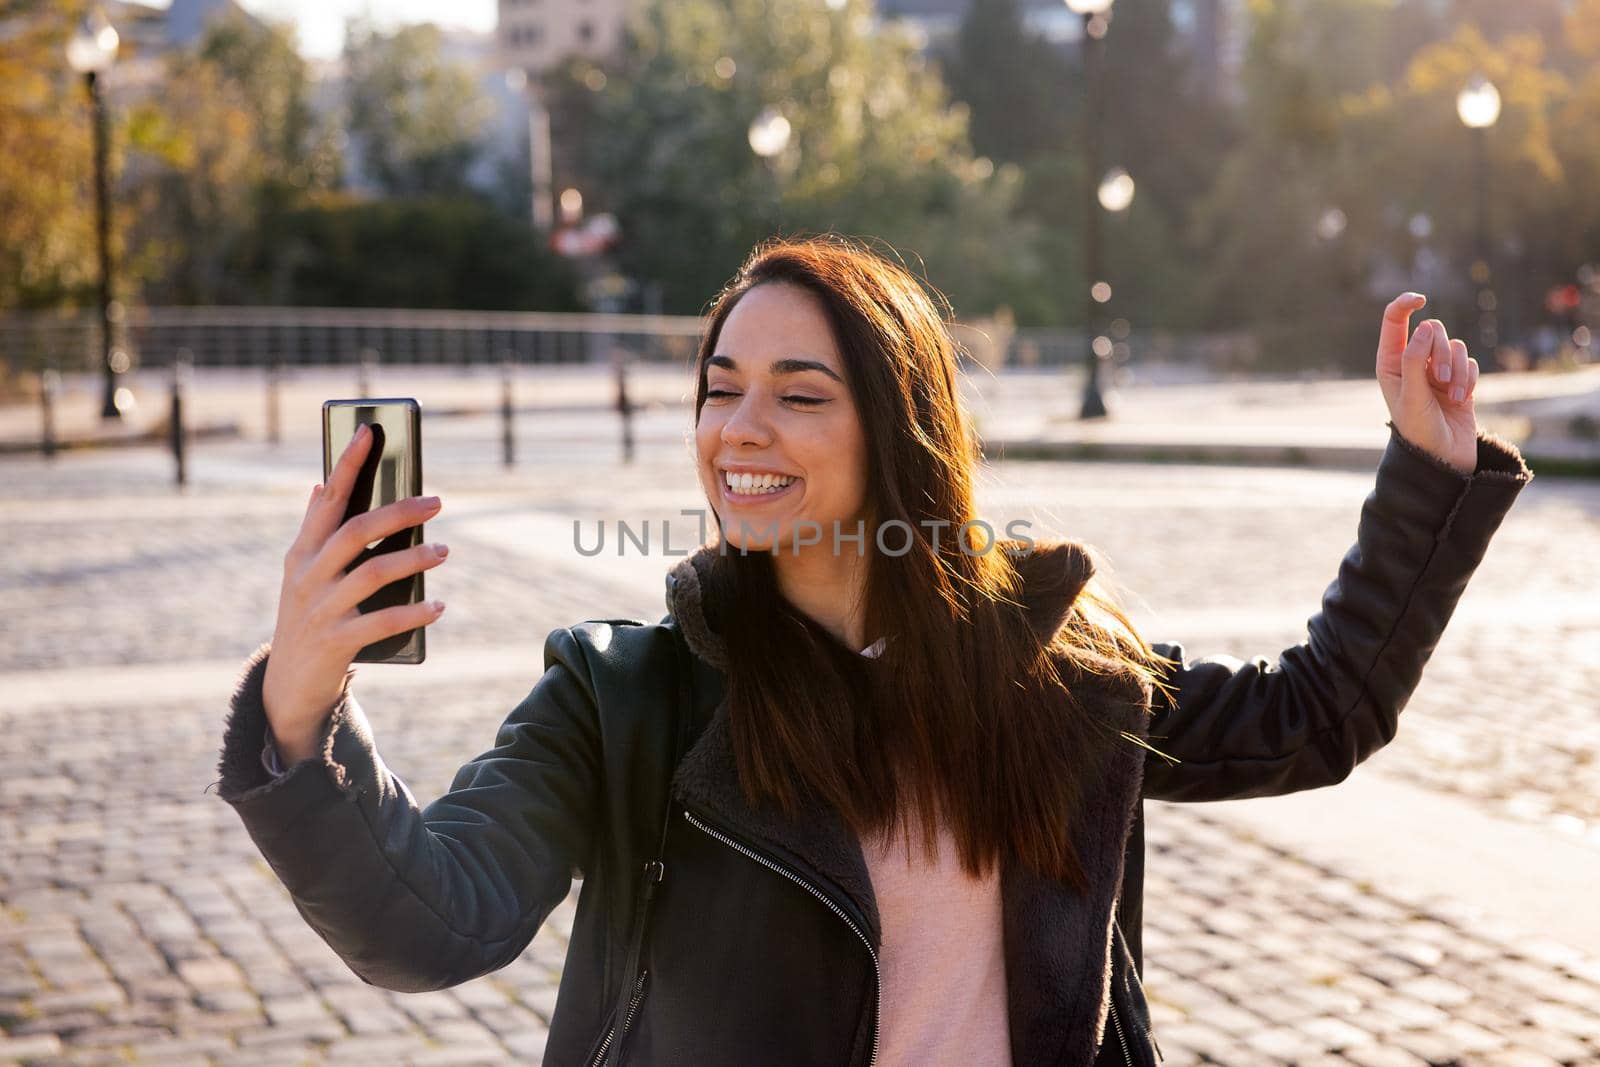 happy young woman smiling and celebrating looking the phone on a cobblestone street, concept of technology and urban lifestyle, copyspace for text